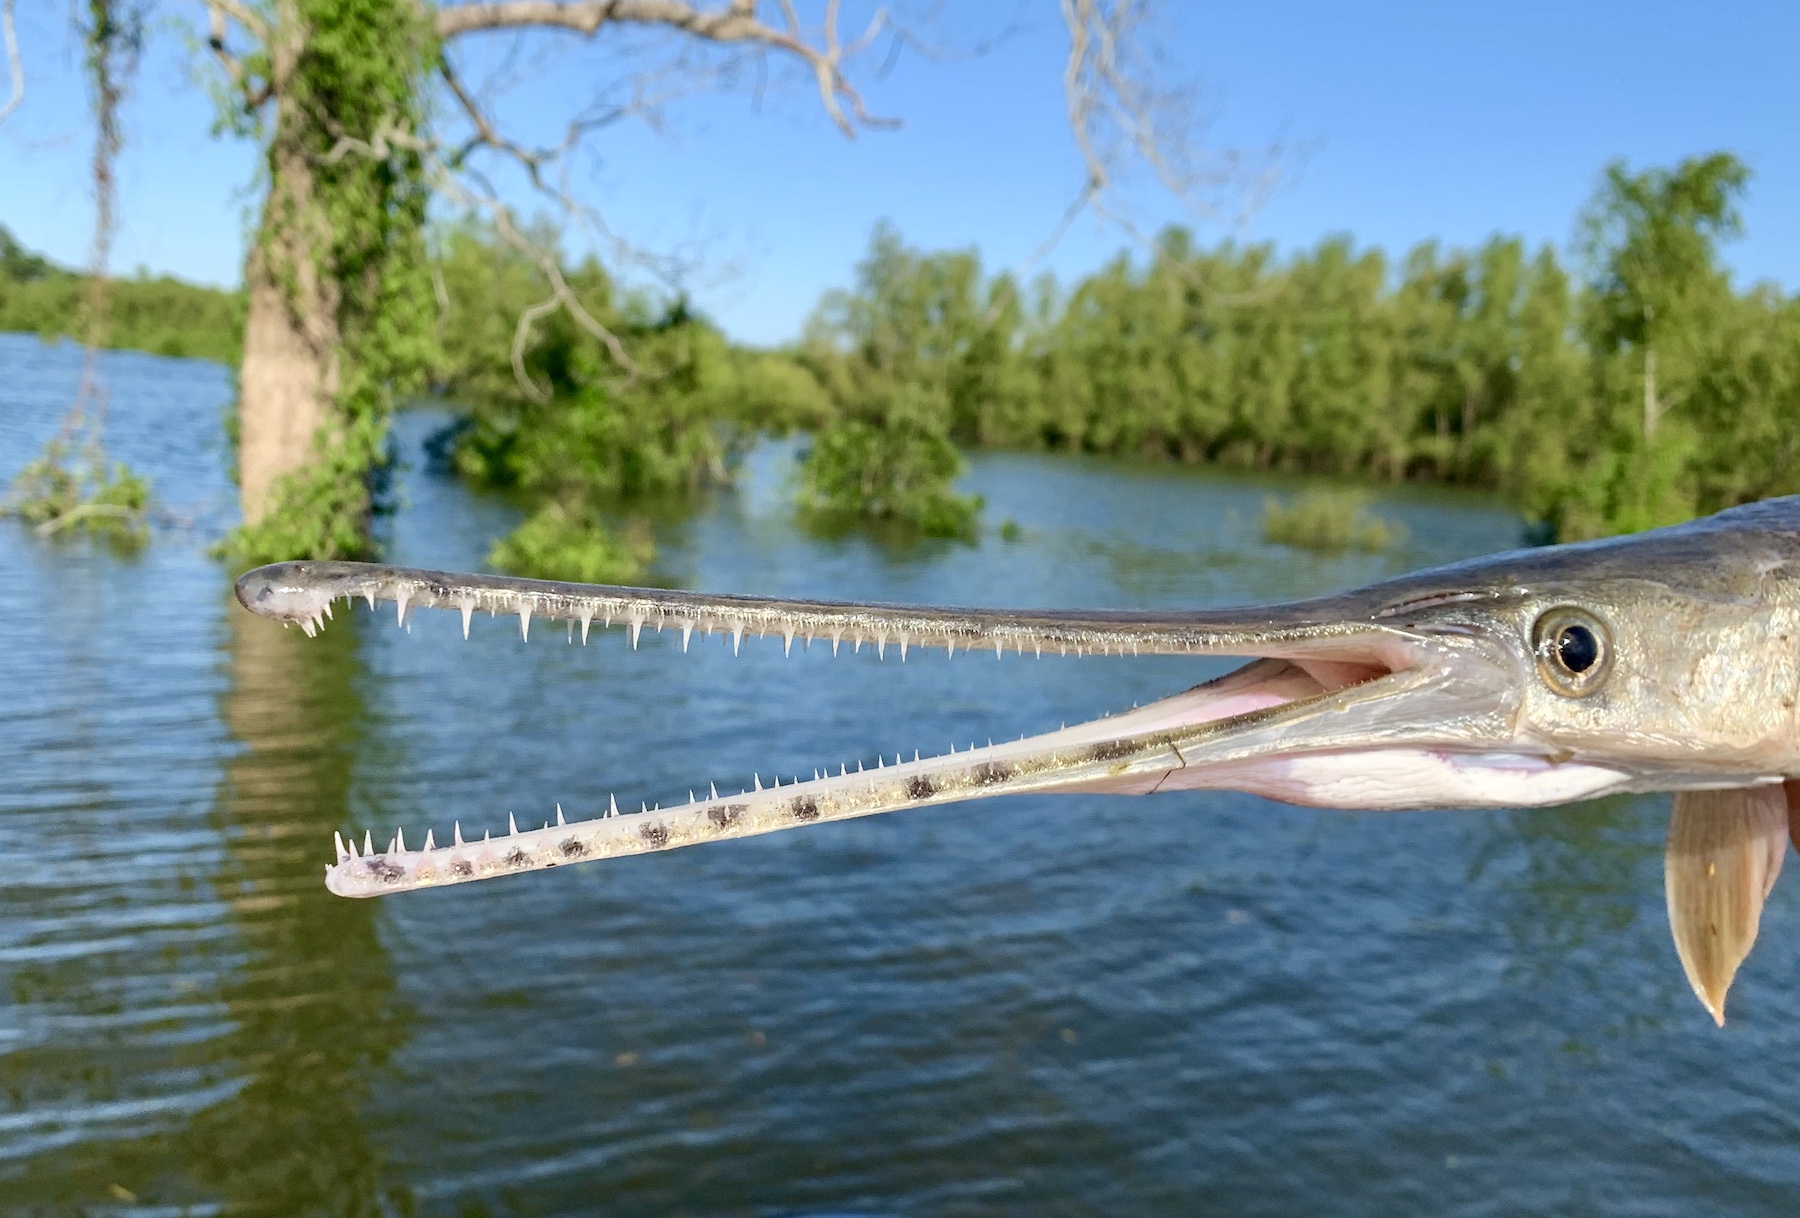 A fish with a long snout and teeth is suspended above a lake. Its mouth is open and it almost looks like it's smiling.